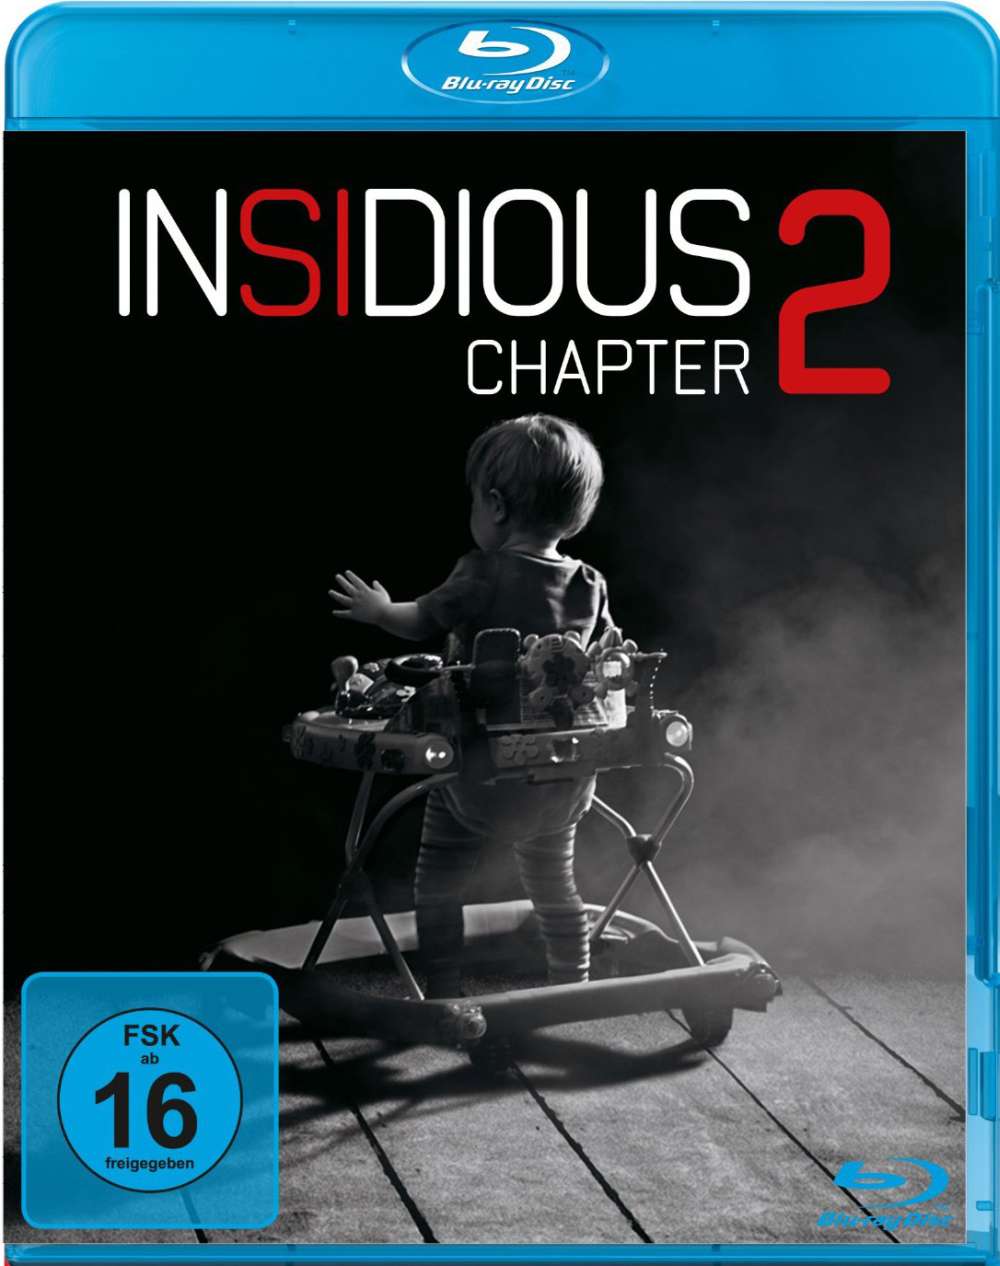 Insidious: Chapter 2 - Film 2012 - Scary-Movies.de.